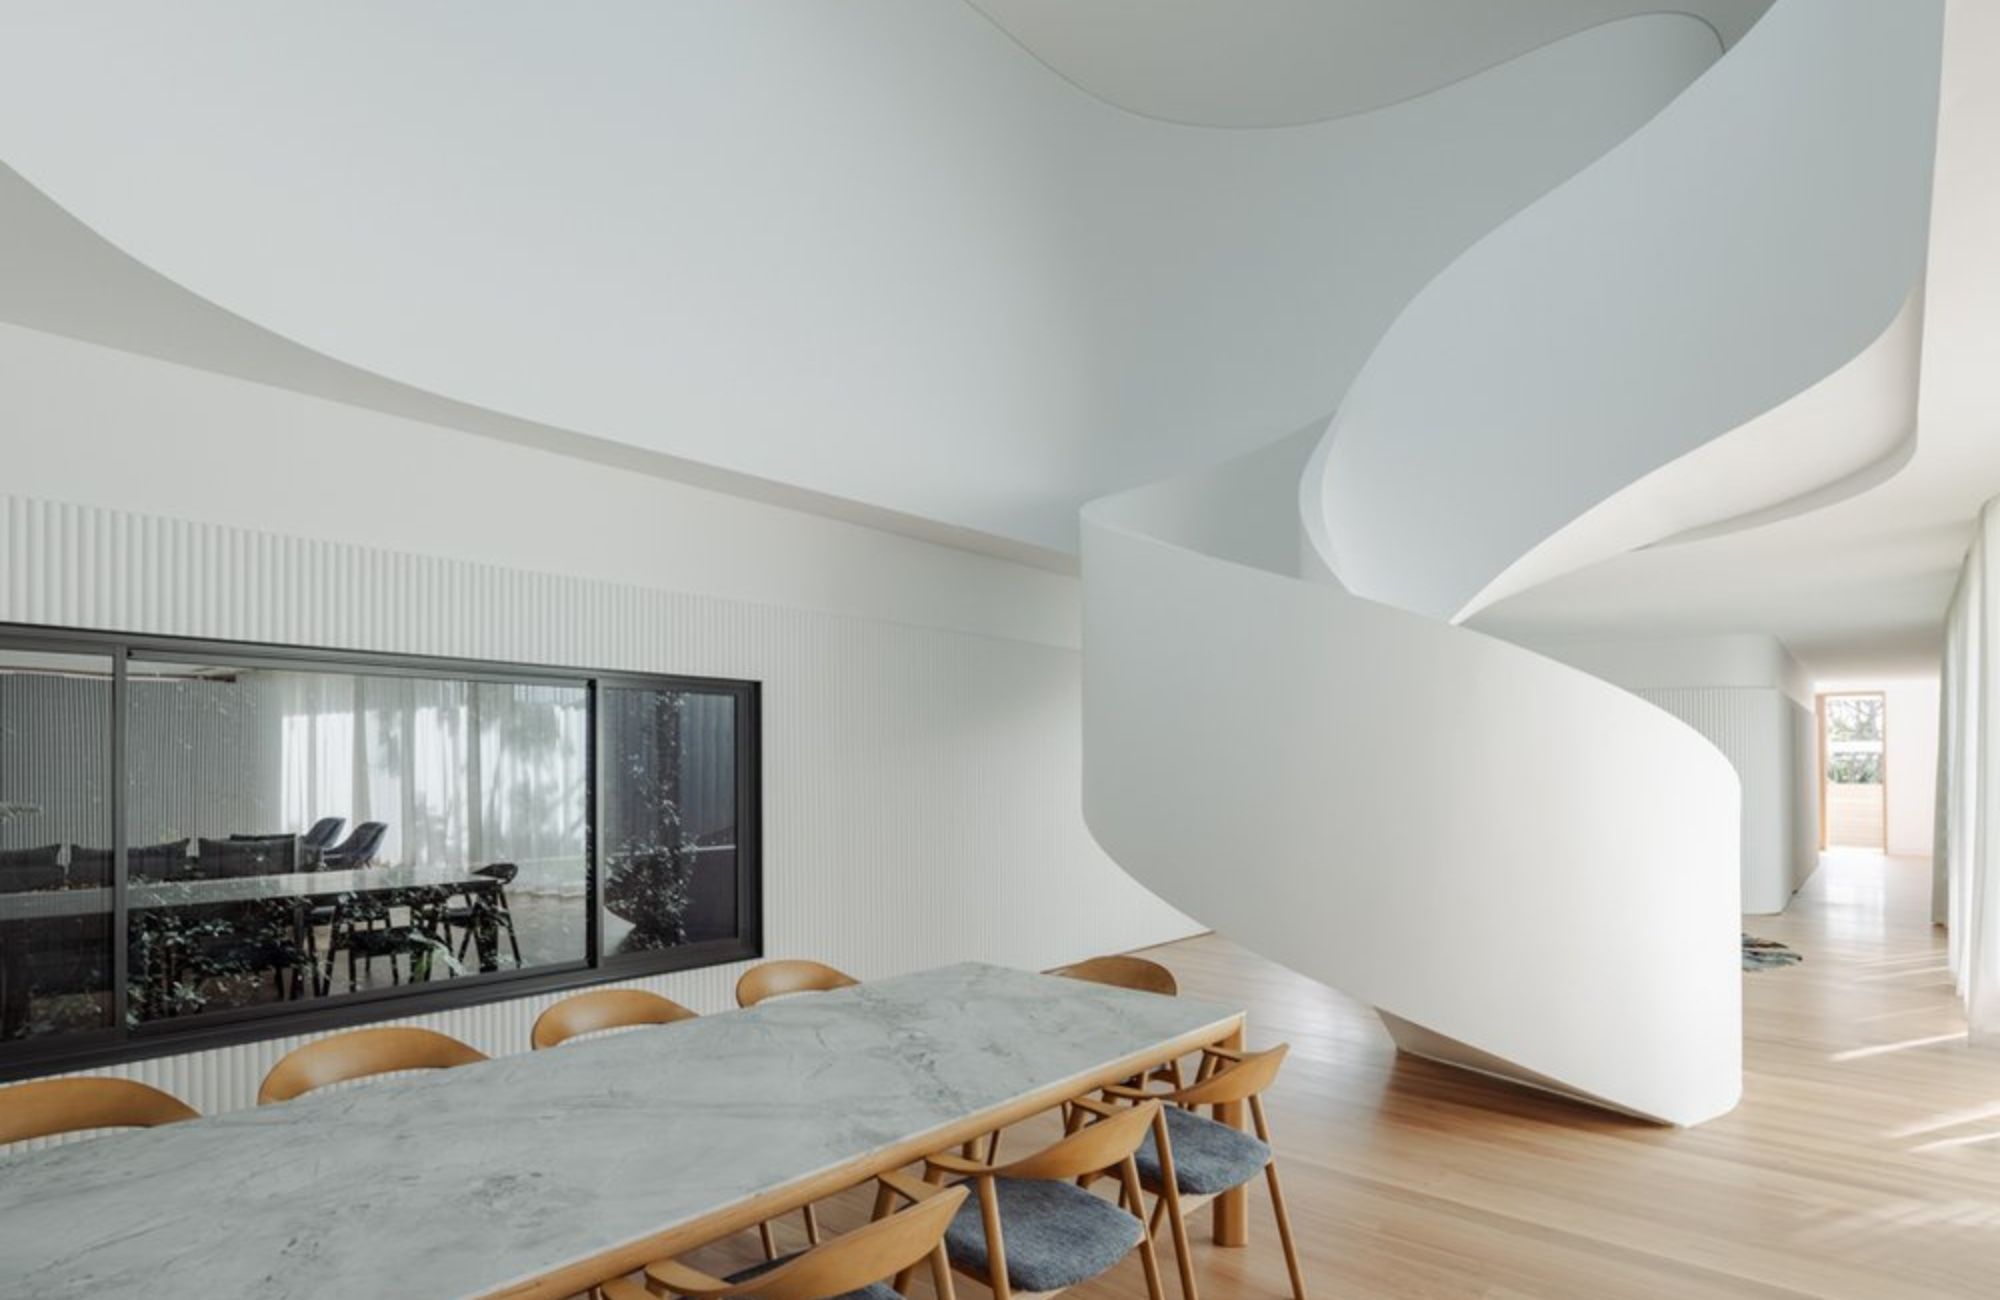 Boomerang House by Joe Adsett Architects. Dining view featuring spiral staircase